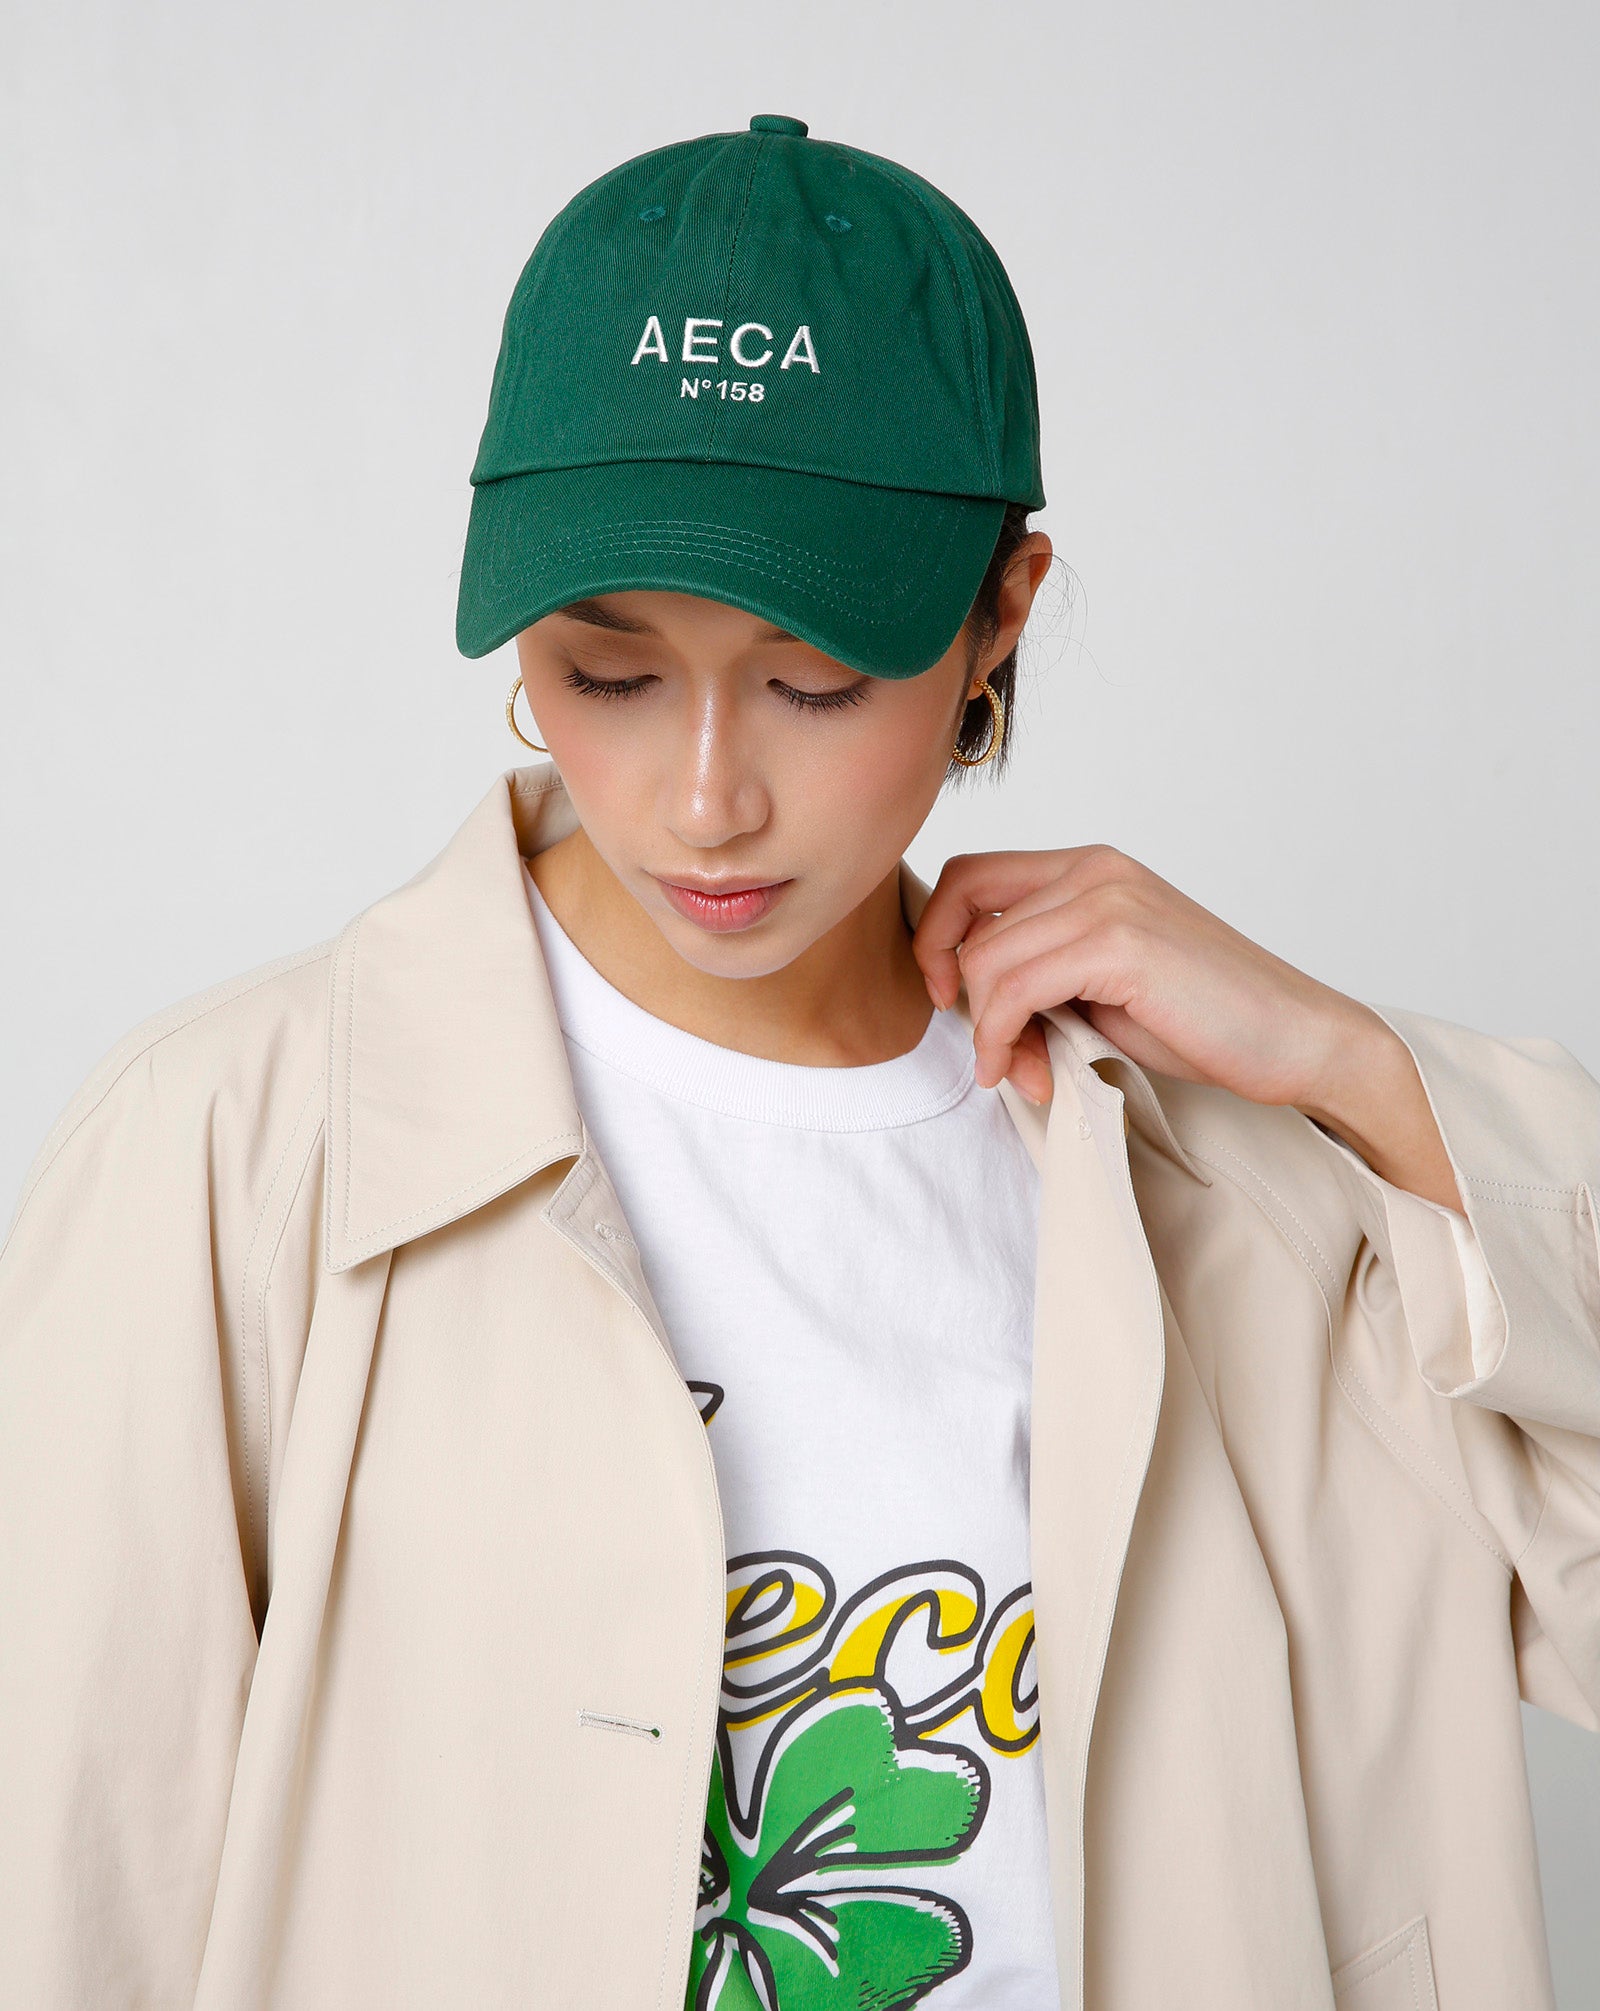 Cap with logo from AECA